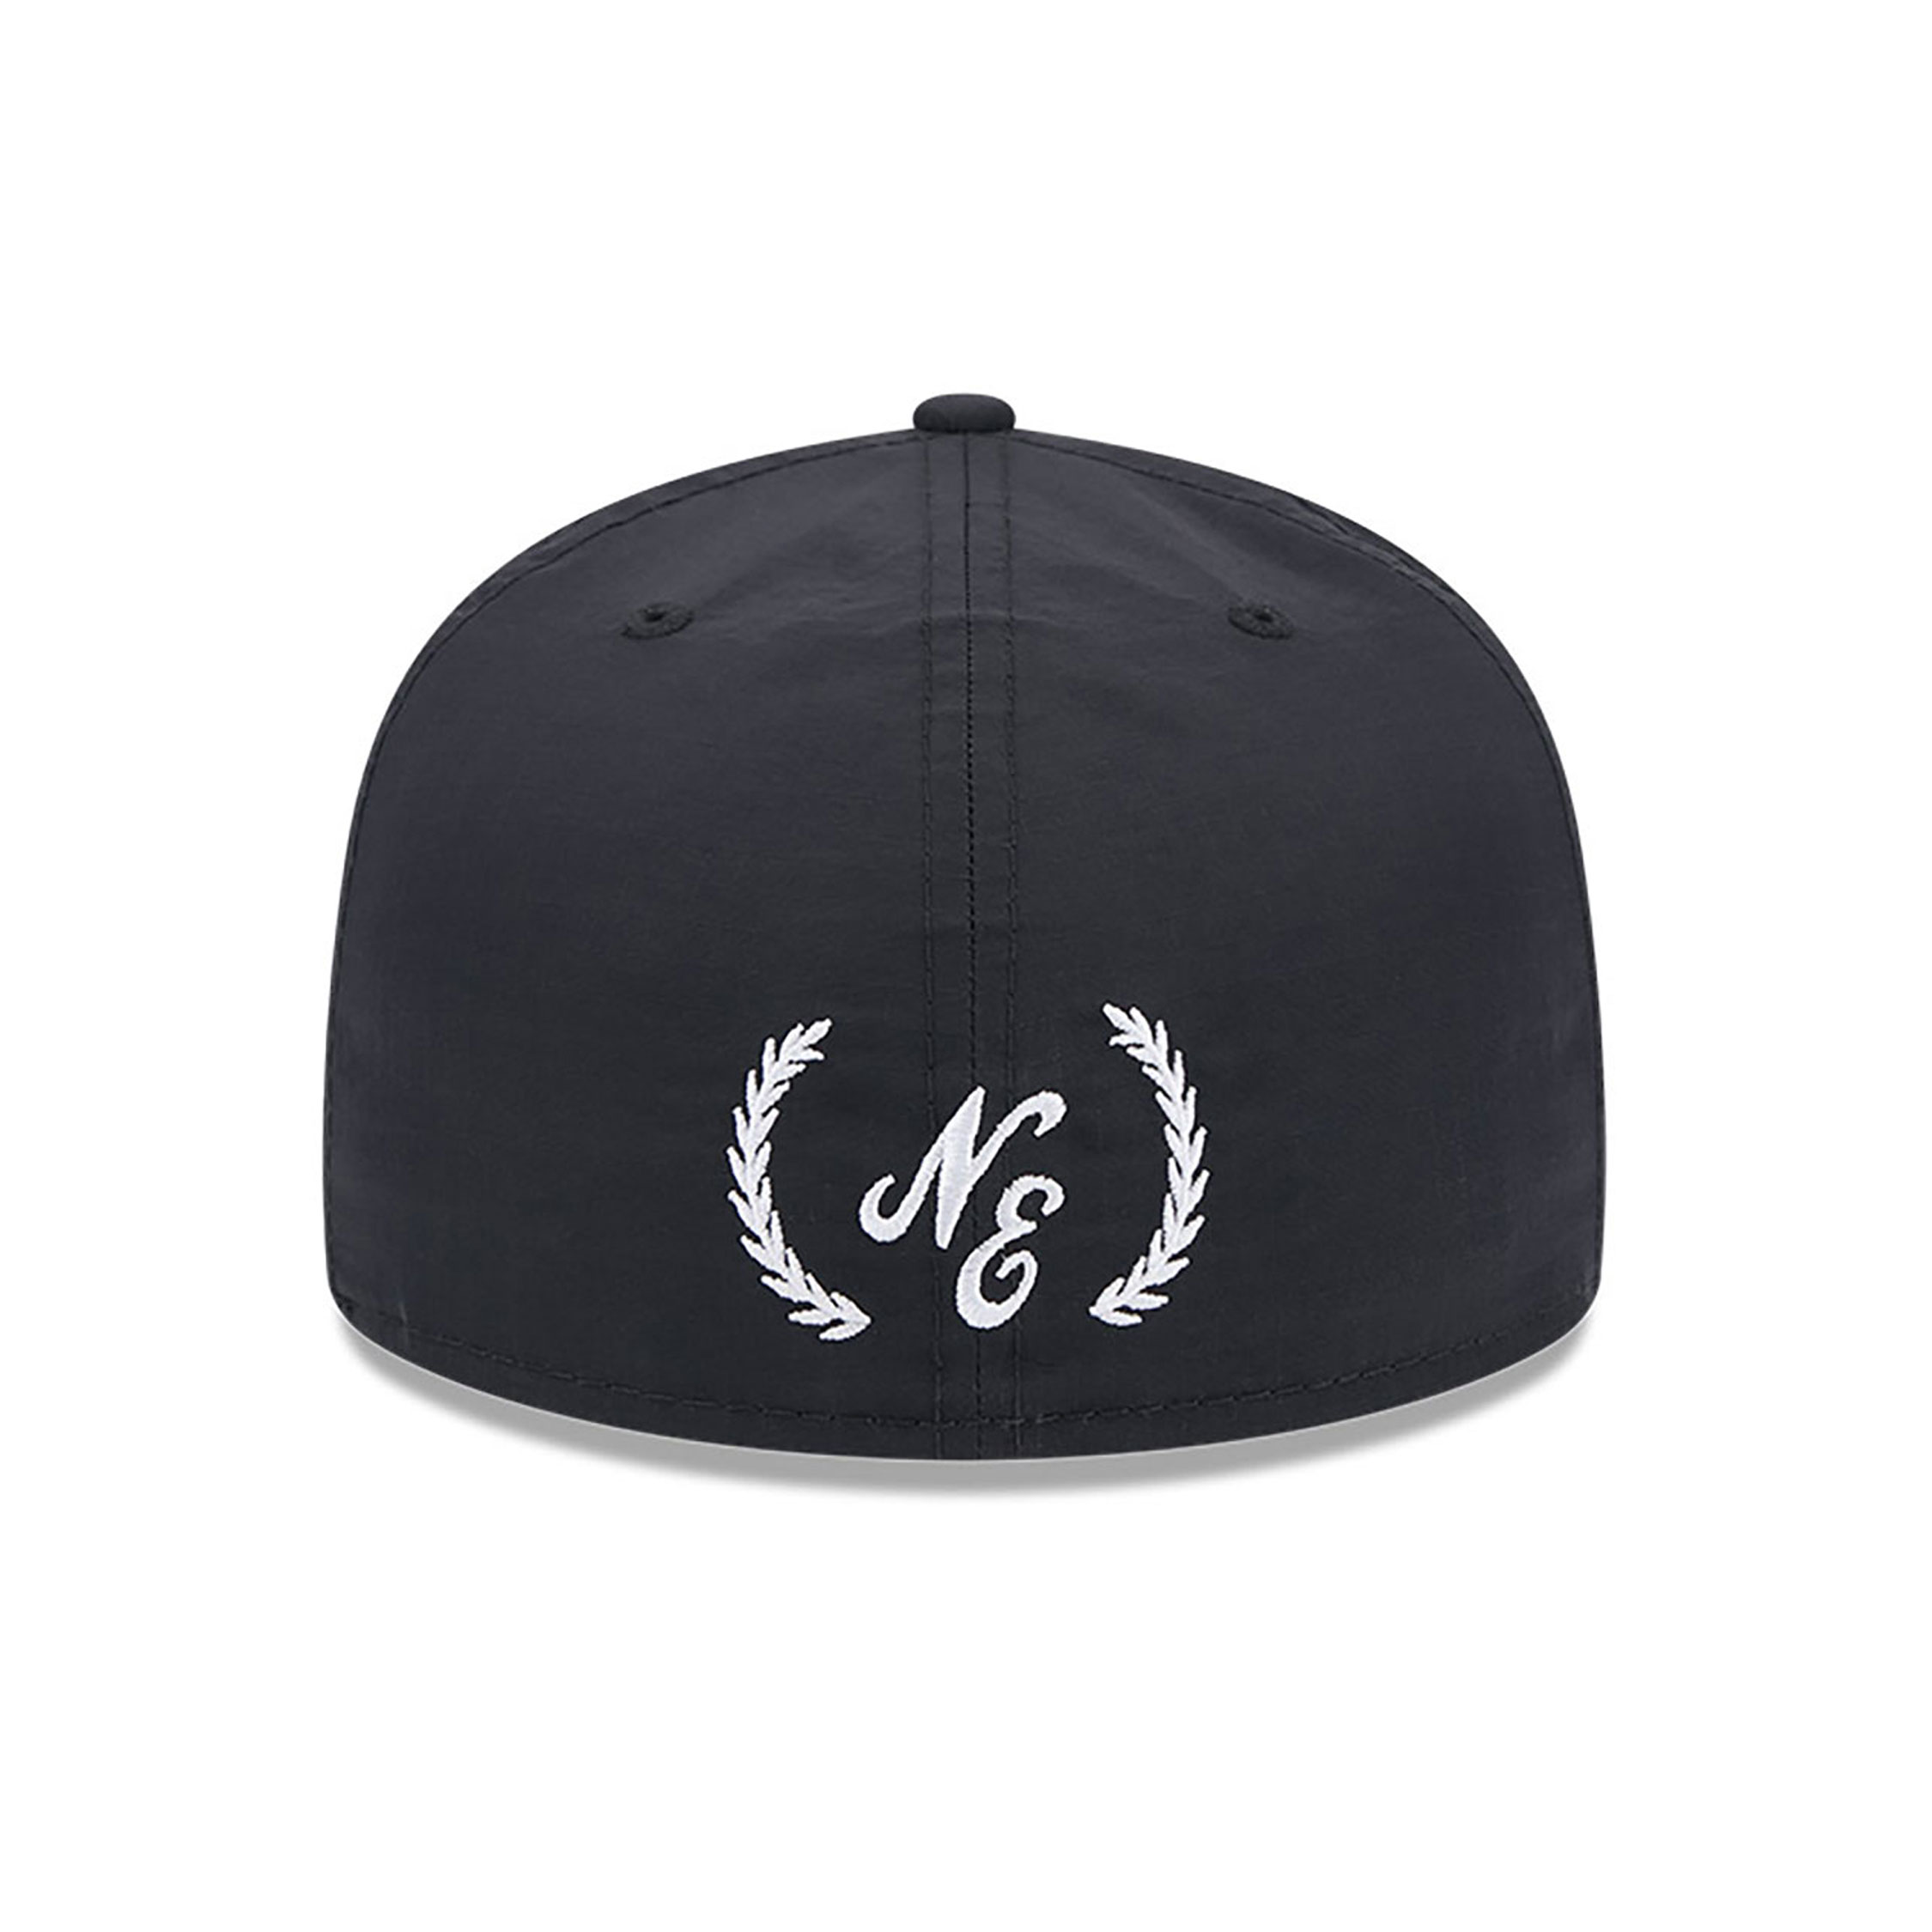 New Era Fairway Black 59FIFTY Fitted Cap